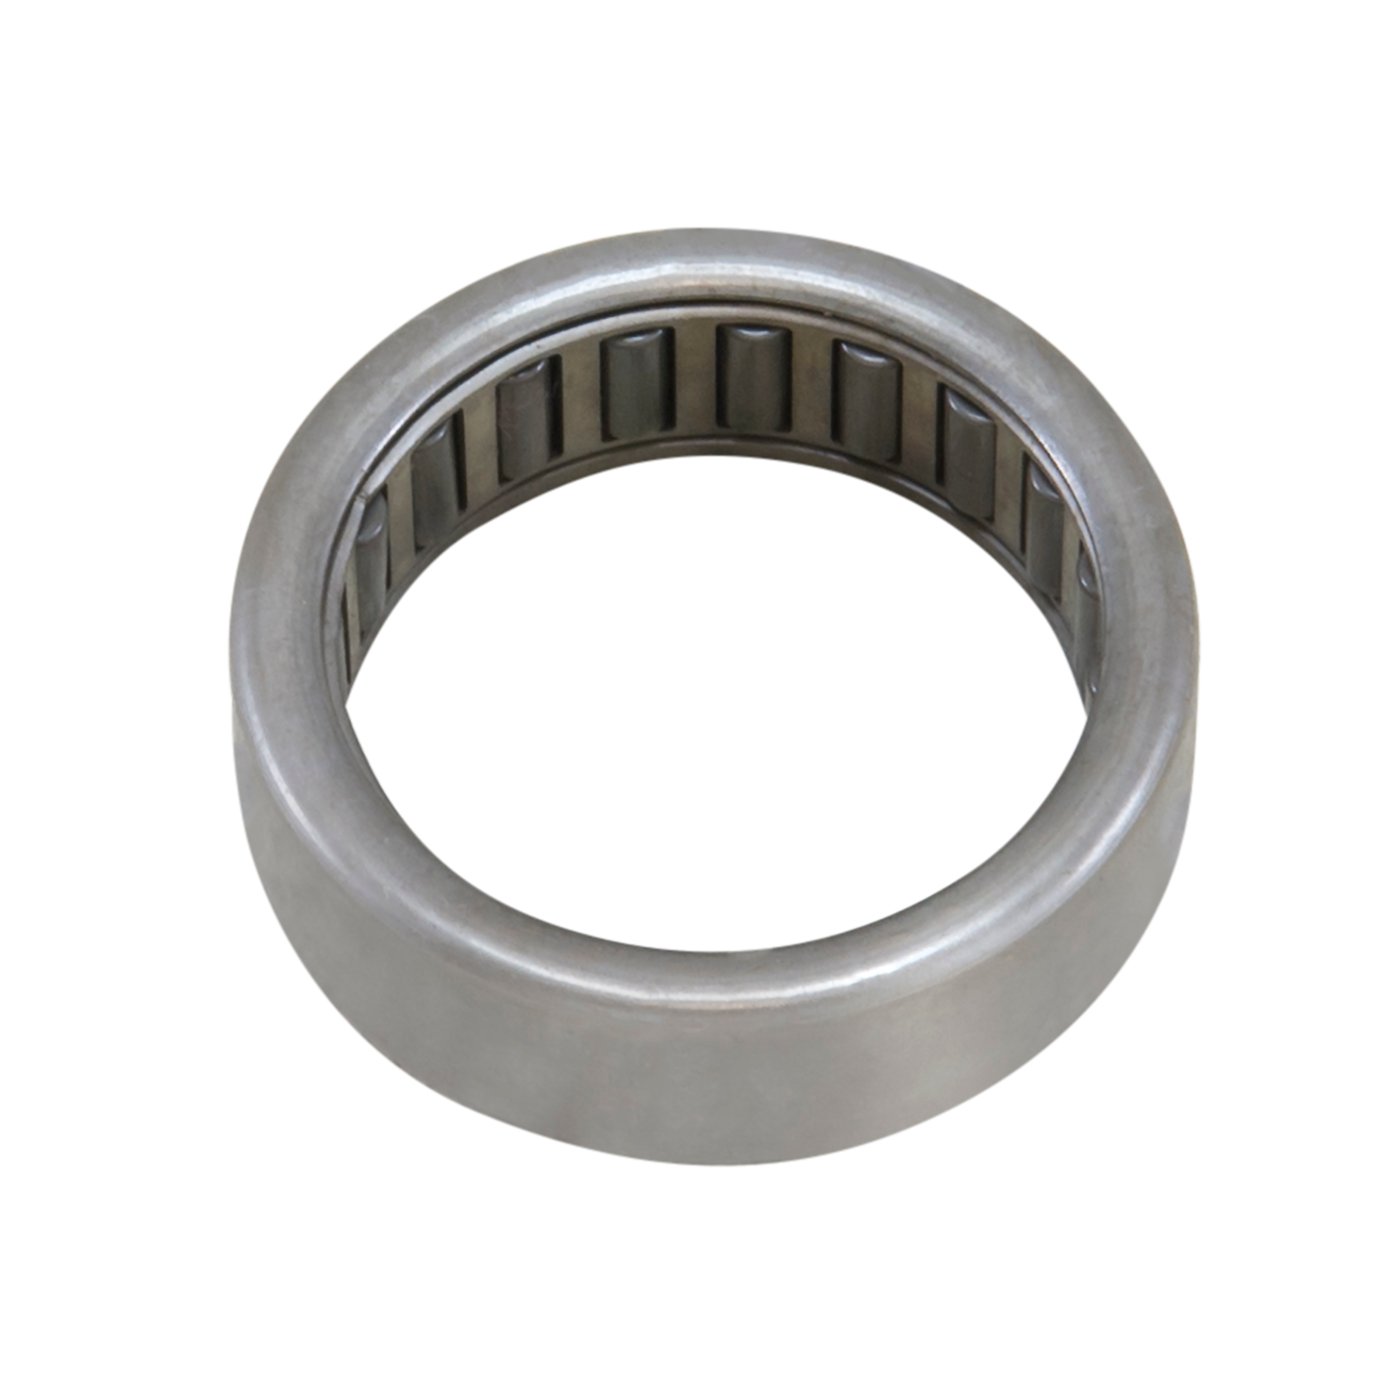 8.25 in. Ifs GM Axle Bearing With 1.625 in. Od